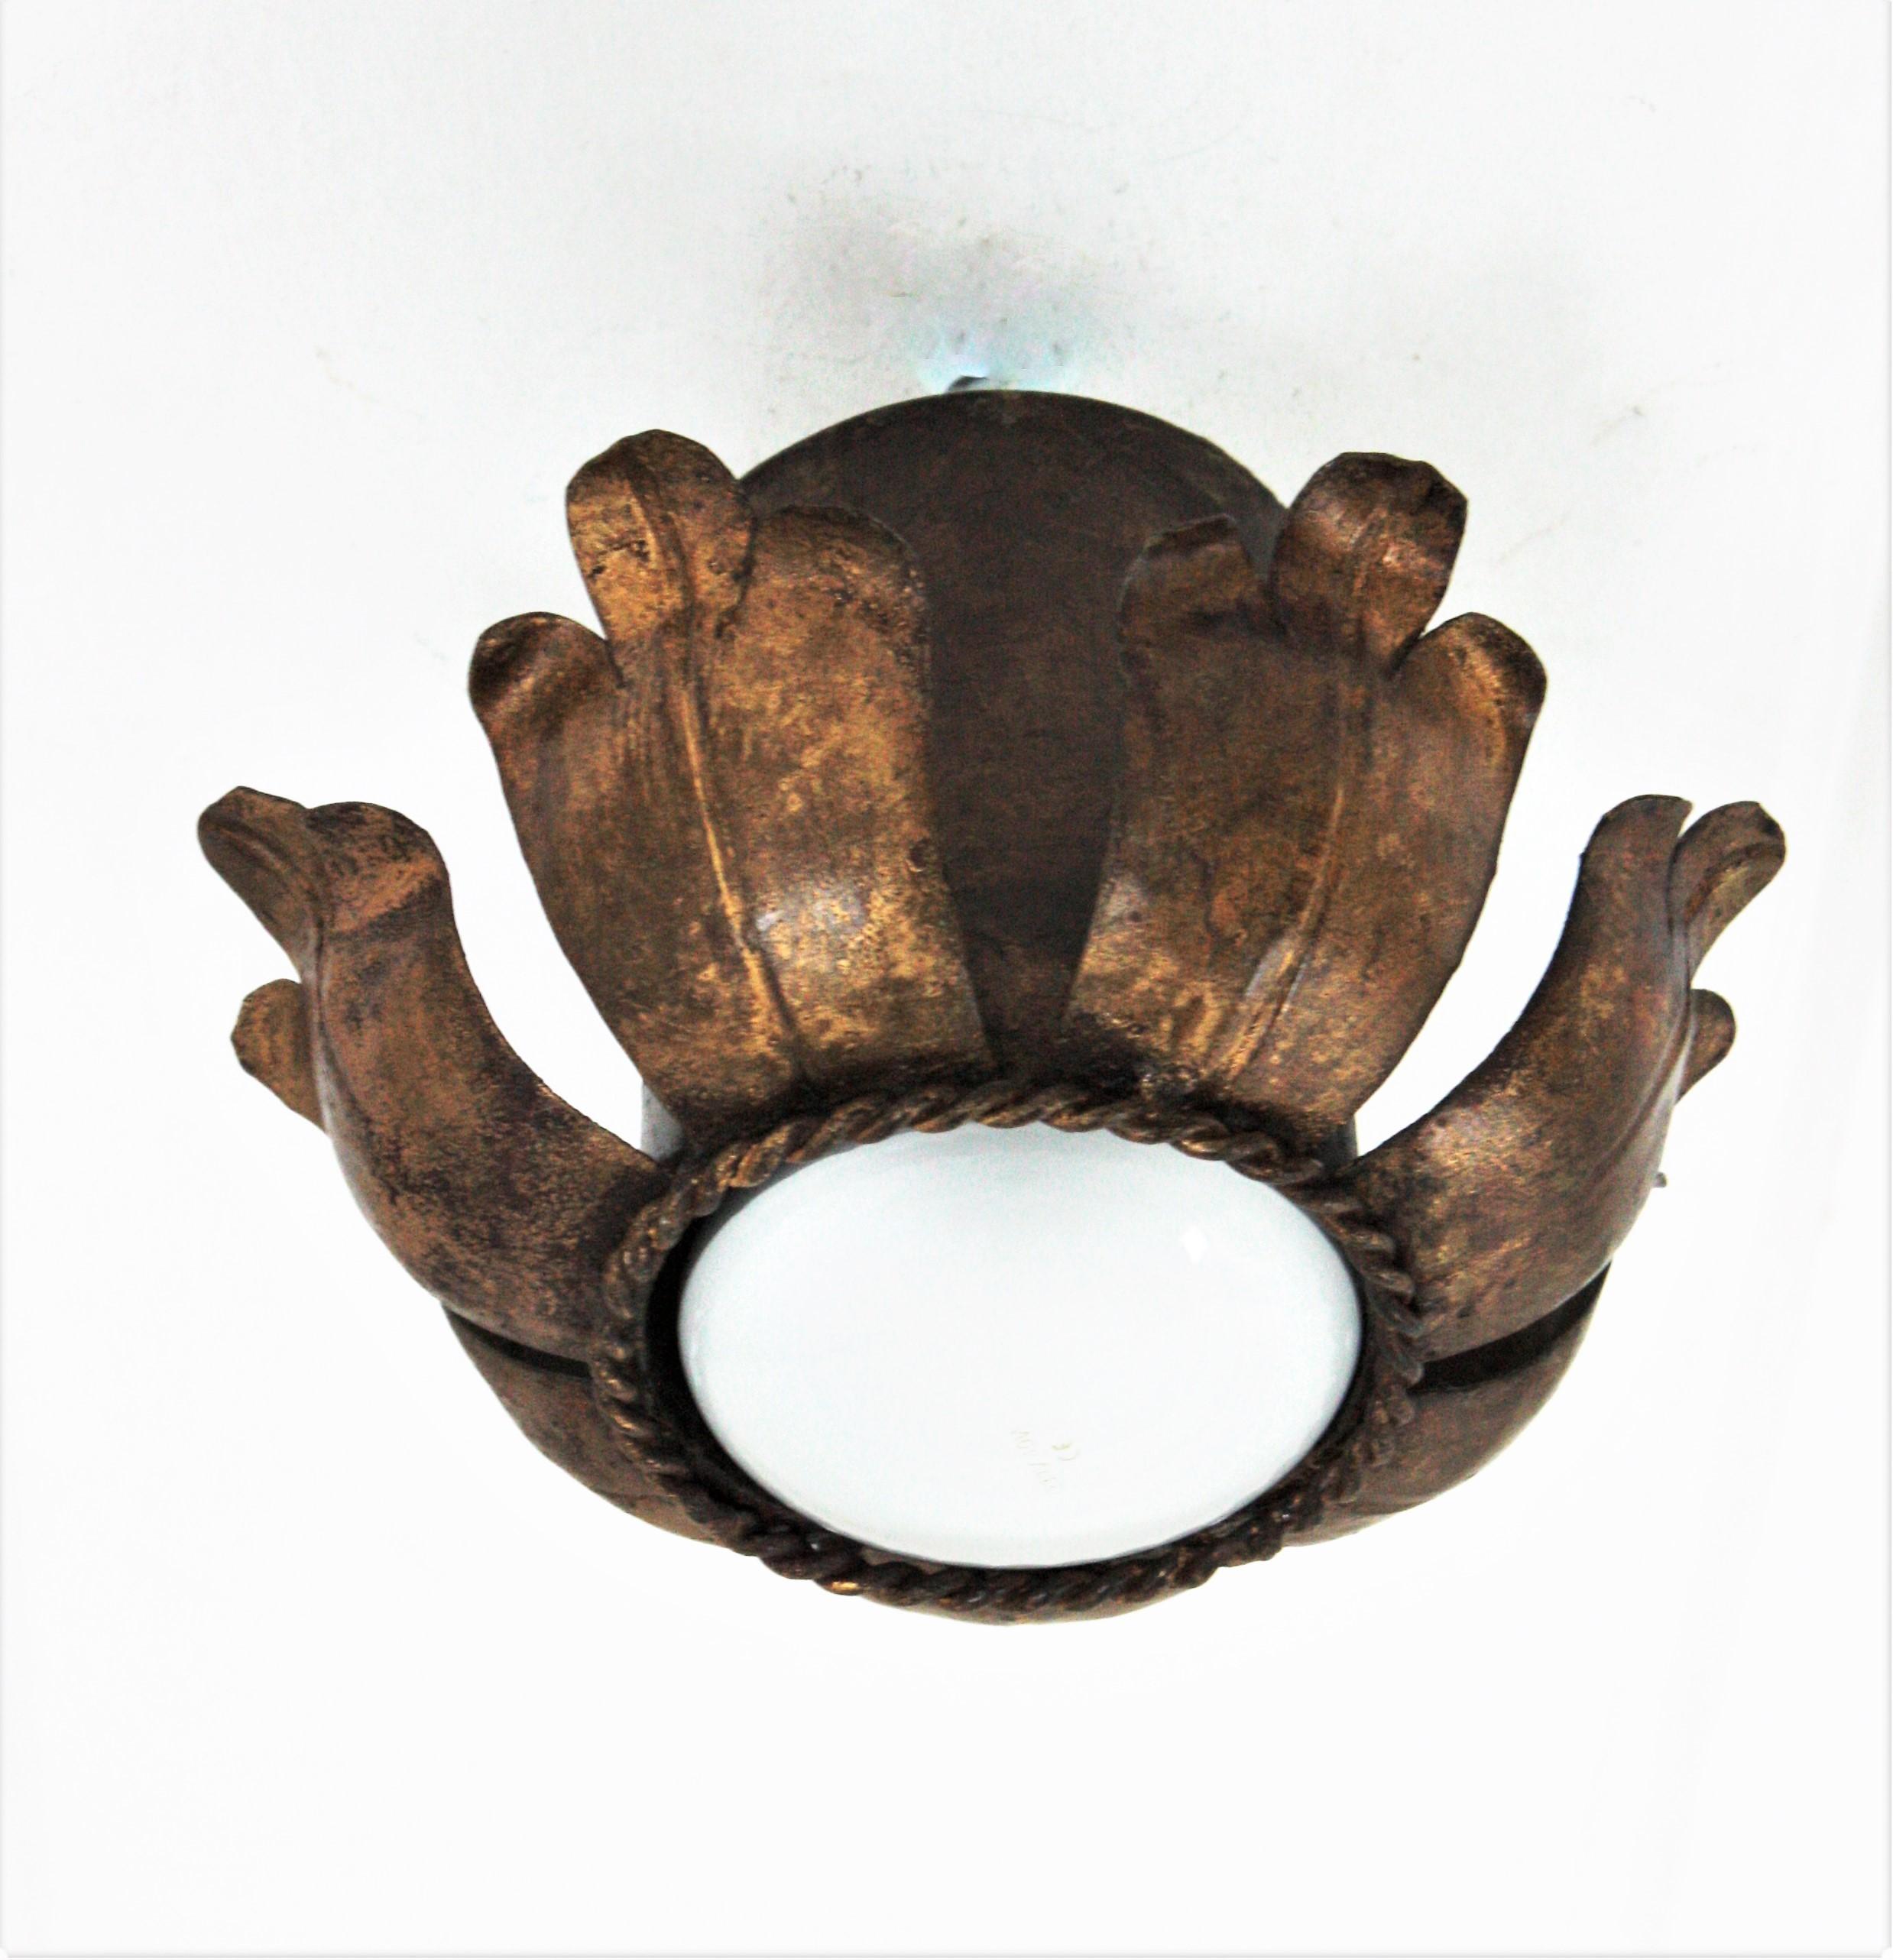 Eye-catching single flower bud/ tole flush mount light fixture in gold leaf gilt iron. France, 1940s.
This handwrought iron ceiling light fixture has a terrific aged patina showing its original gold leaf gilding.
It can be used as a flush mount,